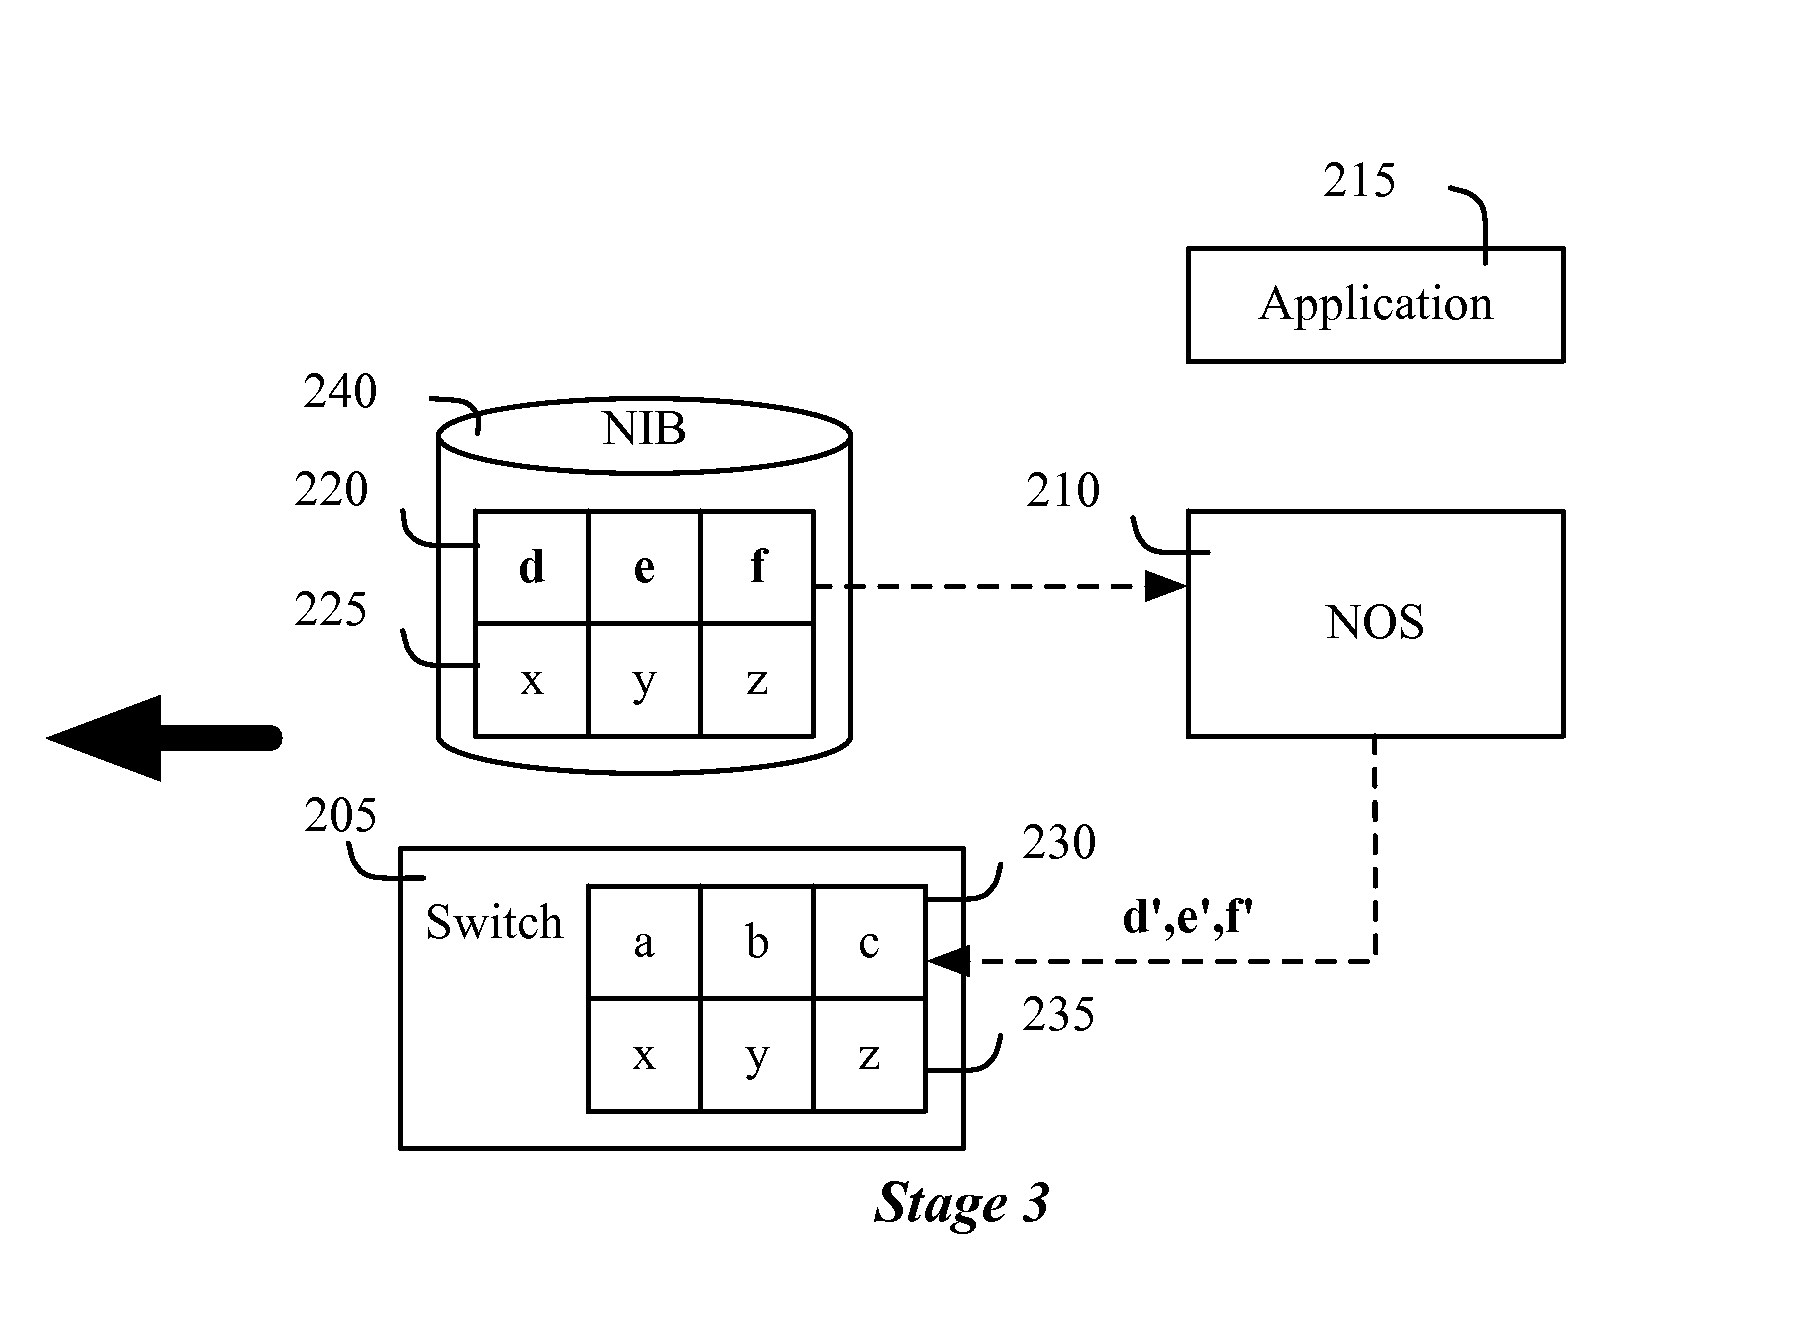 Method and apparatus for interacting with a network information base in a distributed network control system with multiple controller instances